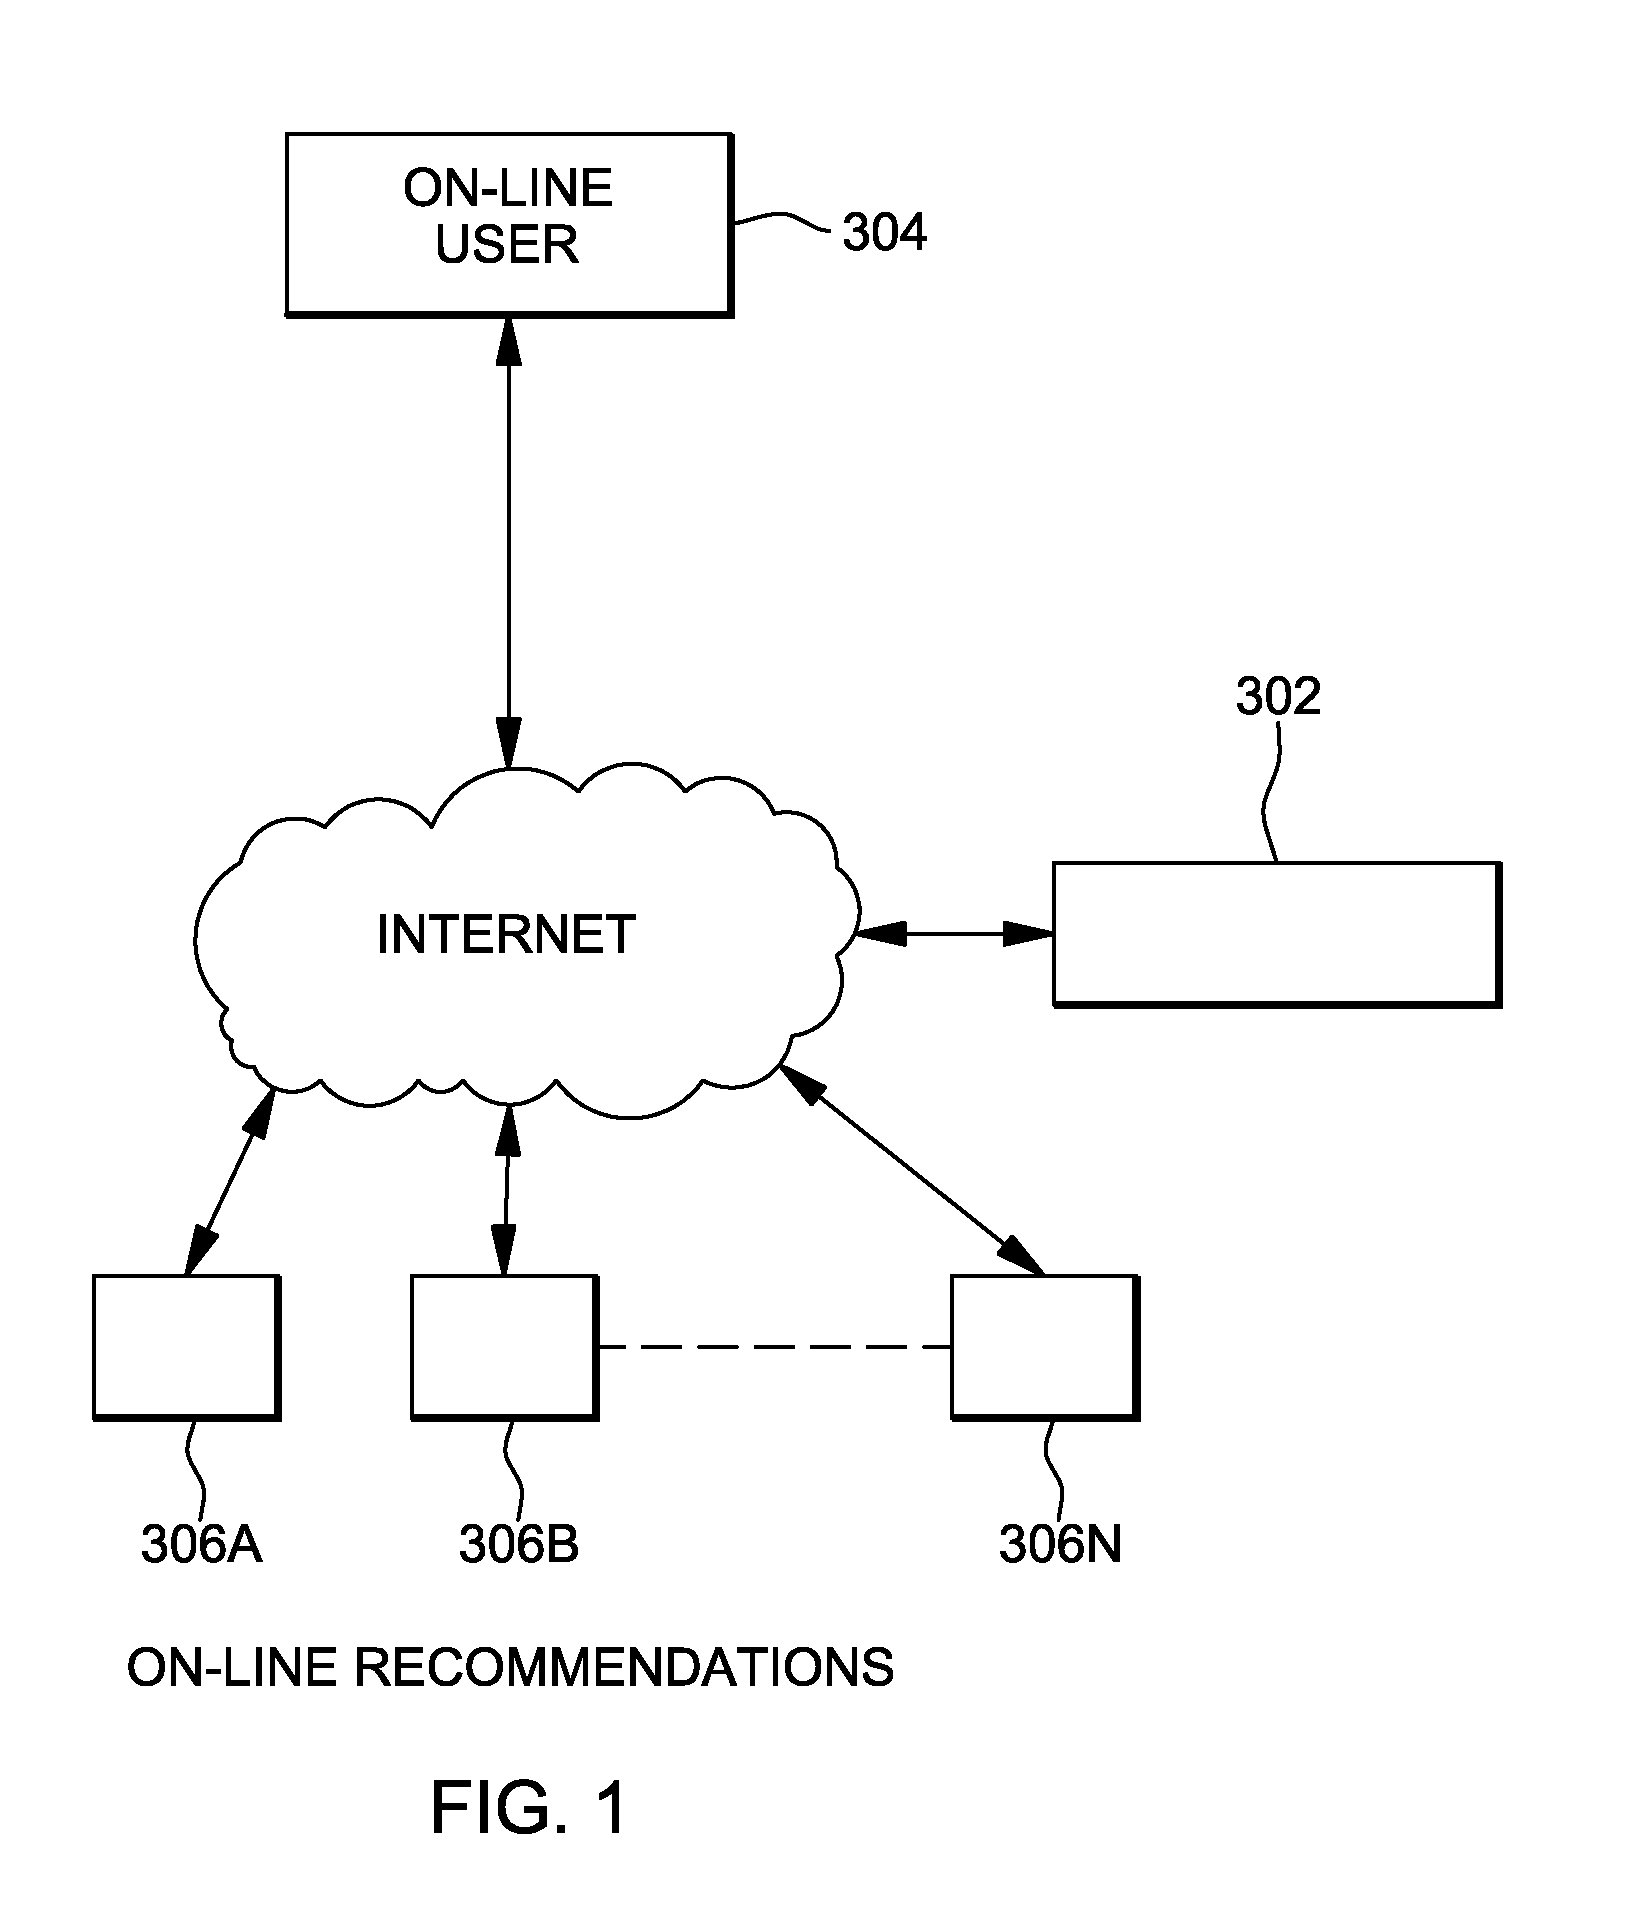 System and method for online media recommendations based on usage analysis